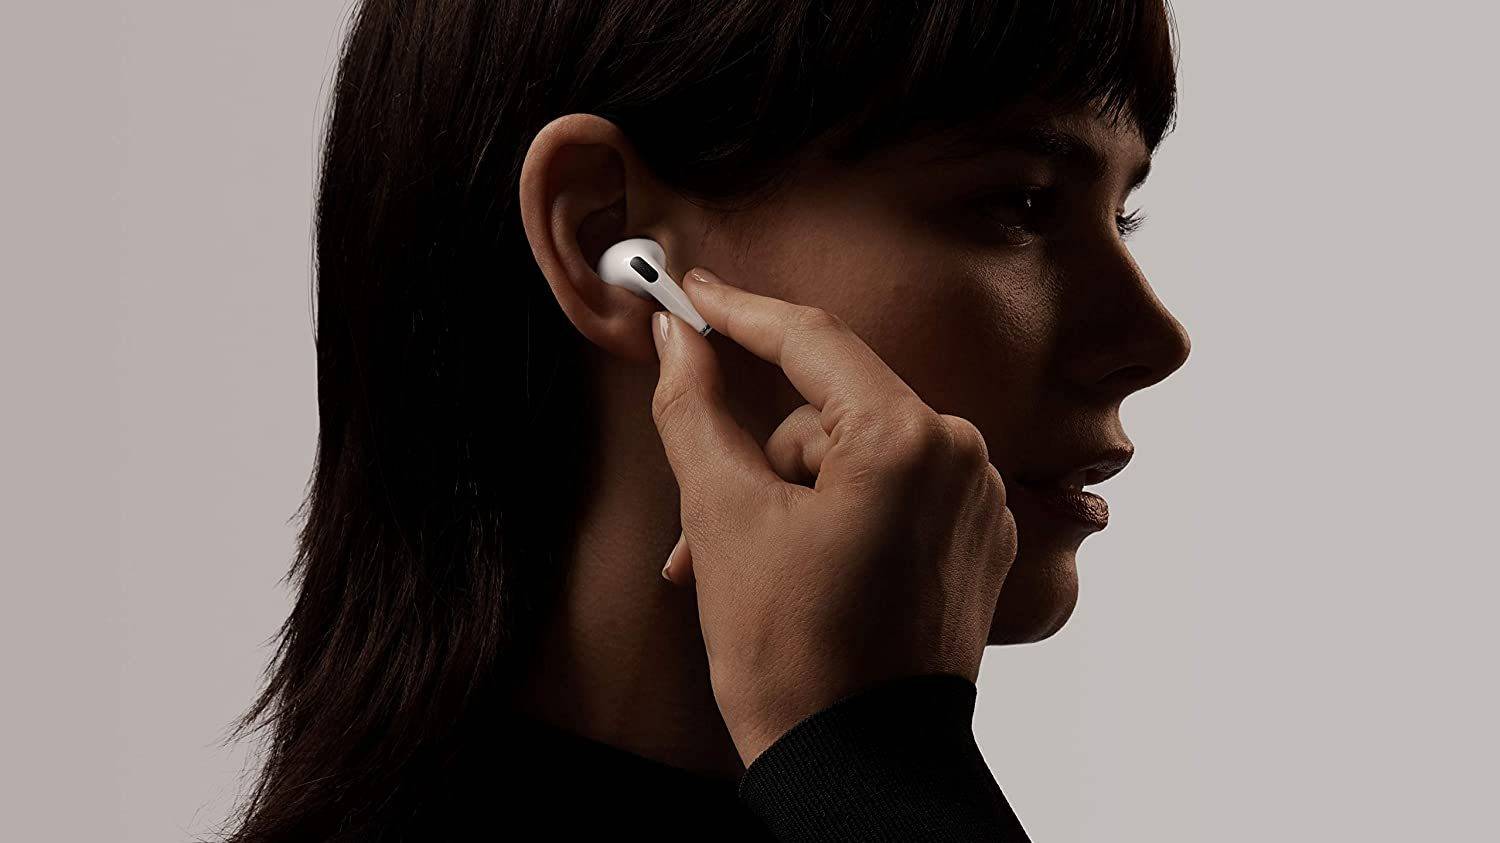 Apple hints AirPods could well bag an inconceivable hidden feature shortly